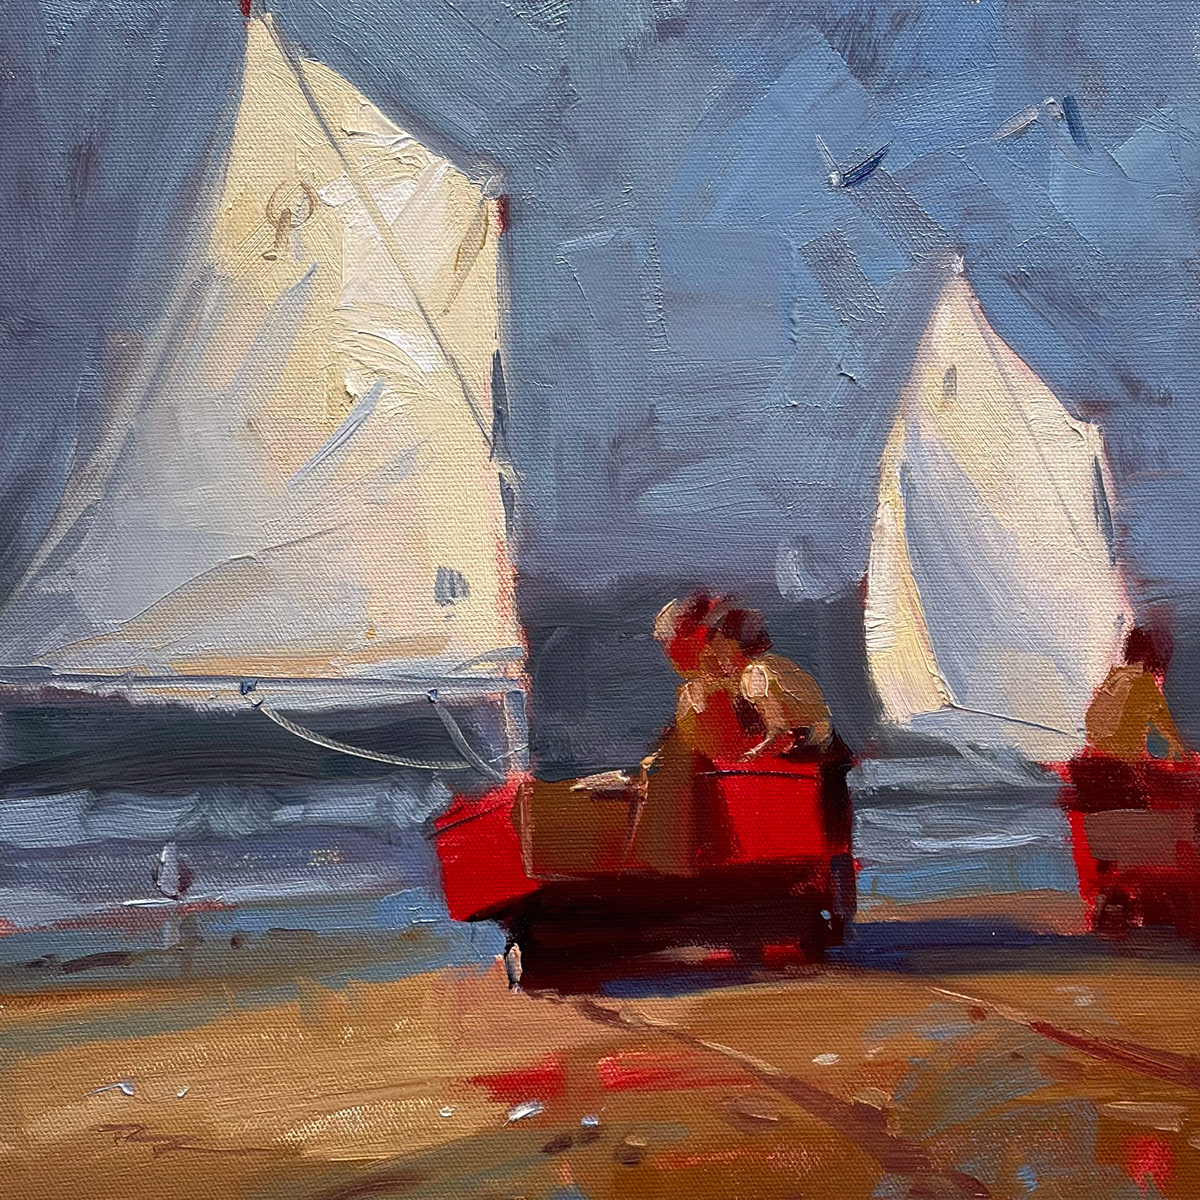 Critiques for The Red Boat